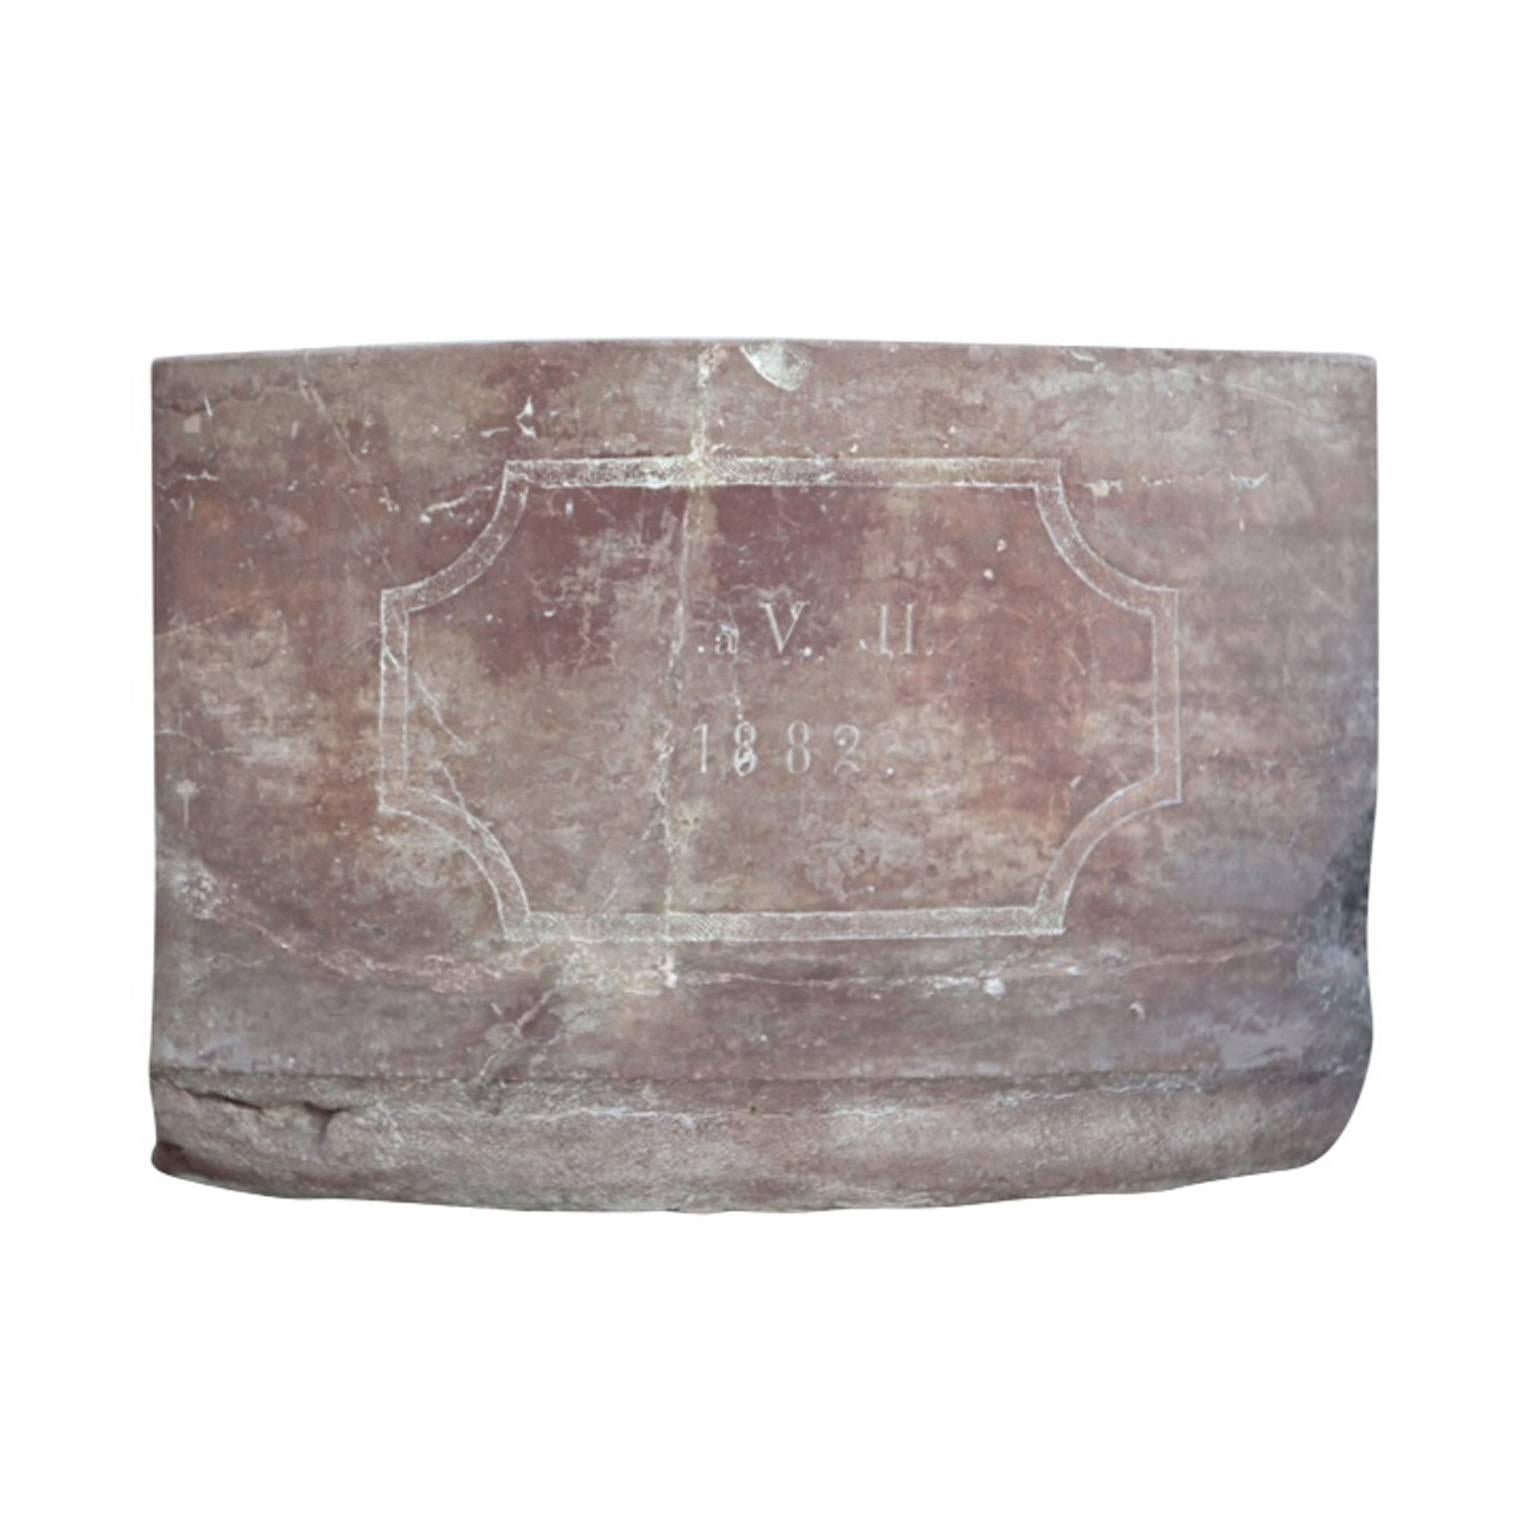 18th century hand-carved rectangular Baroque red Marble basin with a bowed front. Later inscription with the initials V.H.
1882 was carved on the front side, hand-carved red marble.